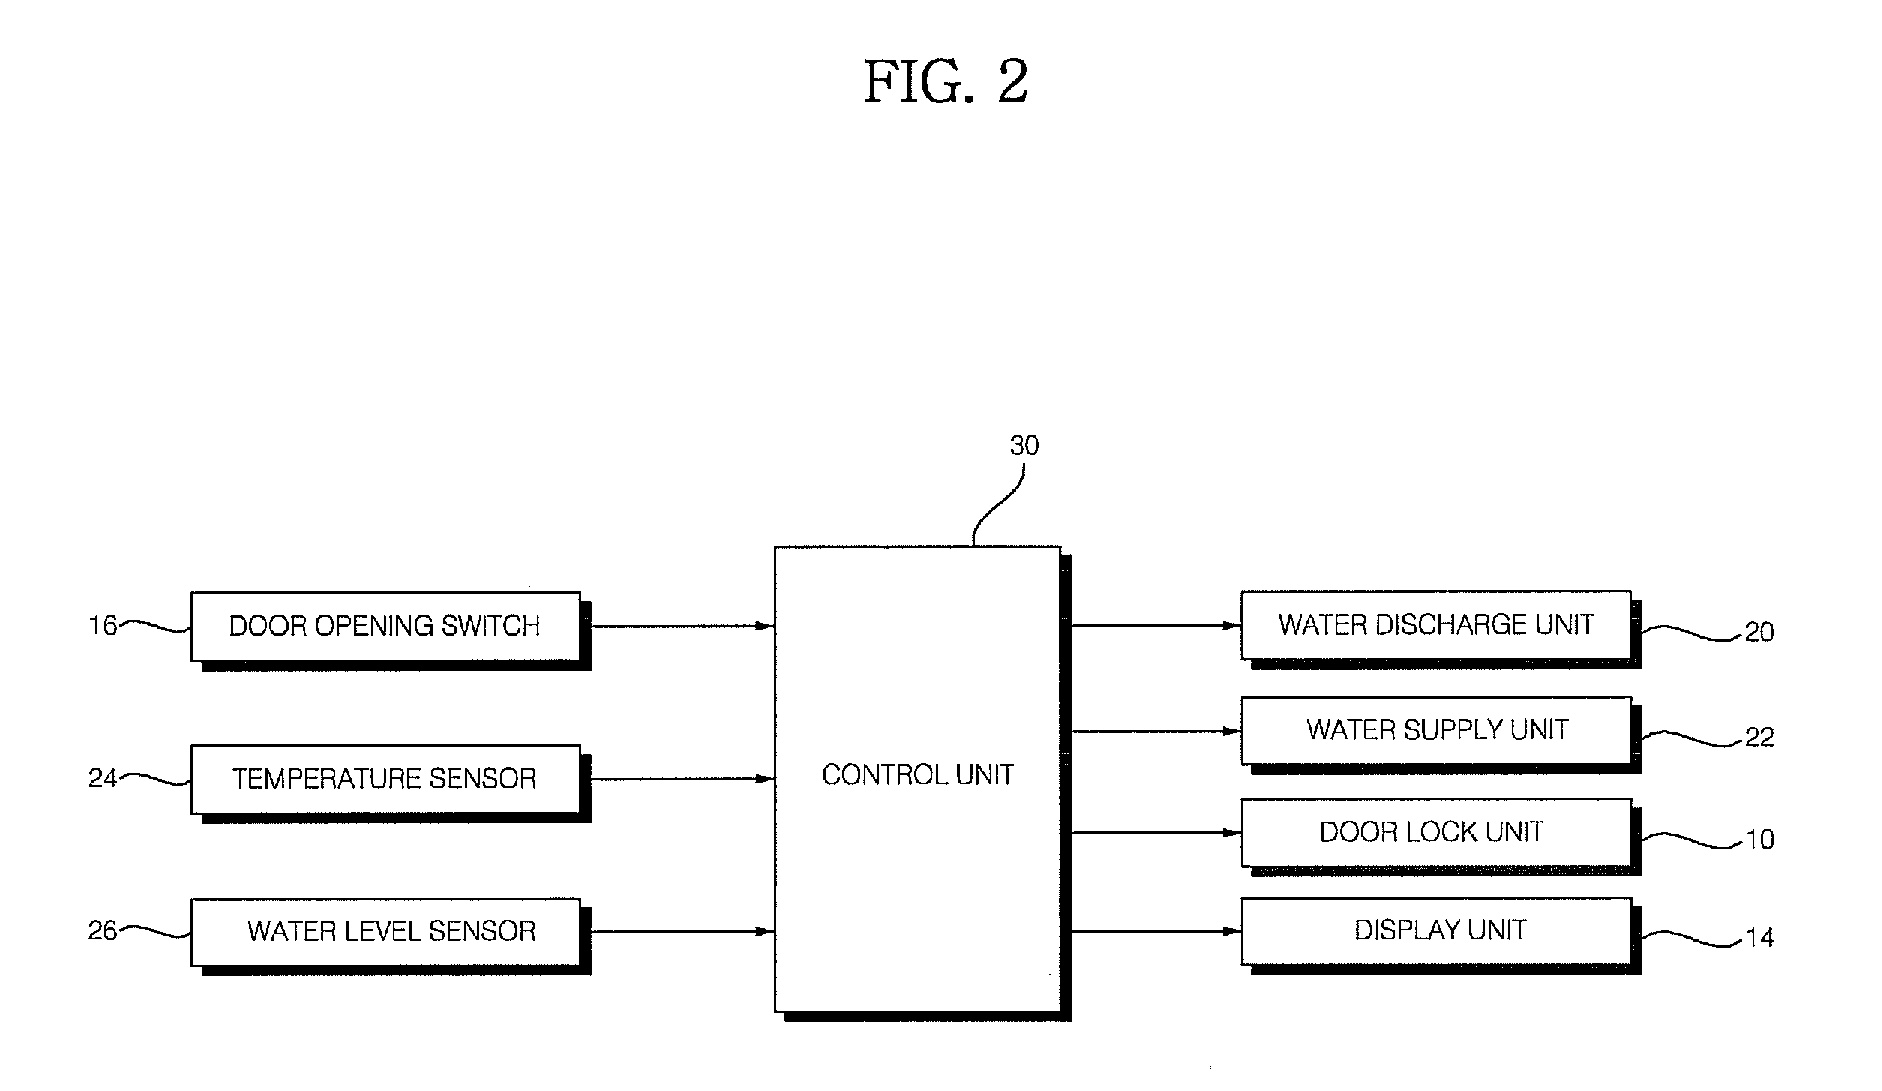 Method of controlling the opening of door of laundry treatment machine